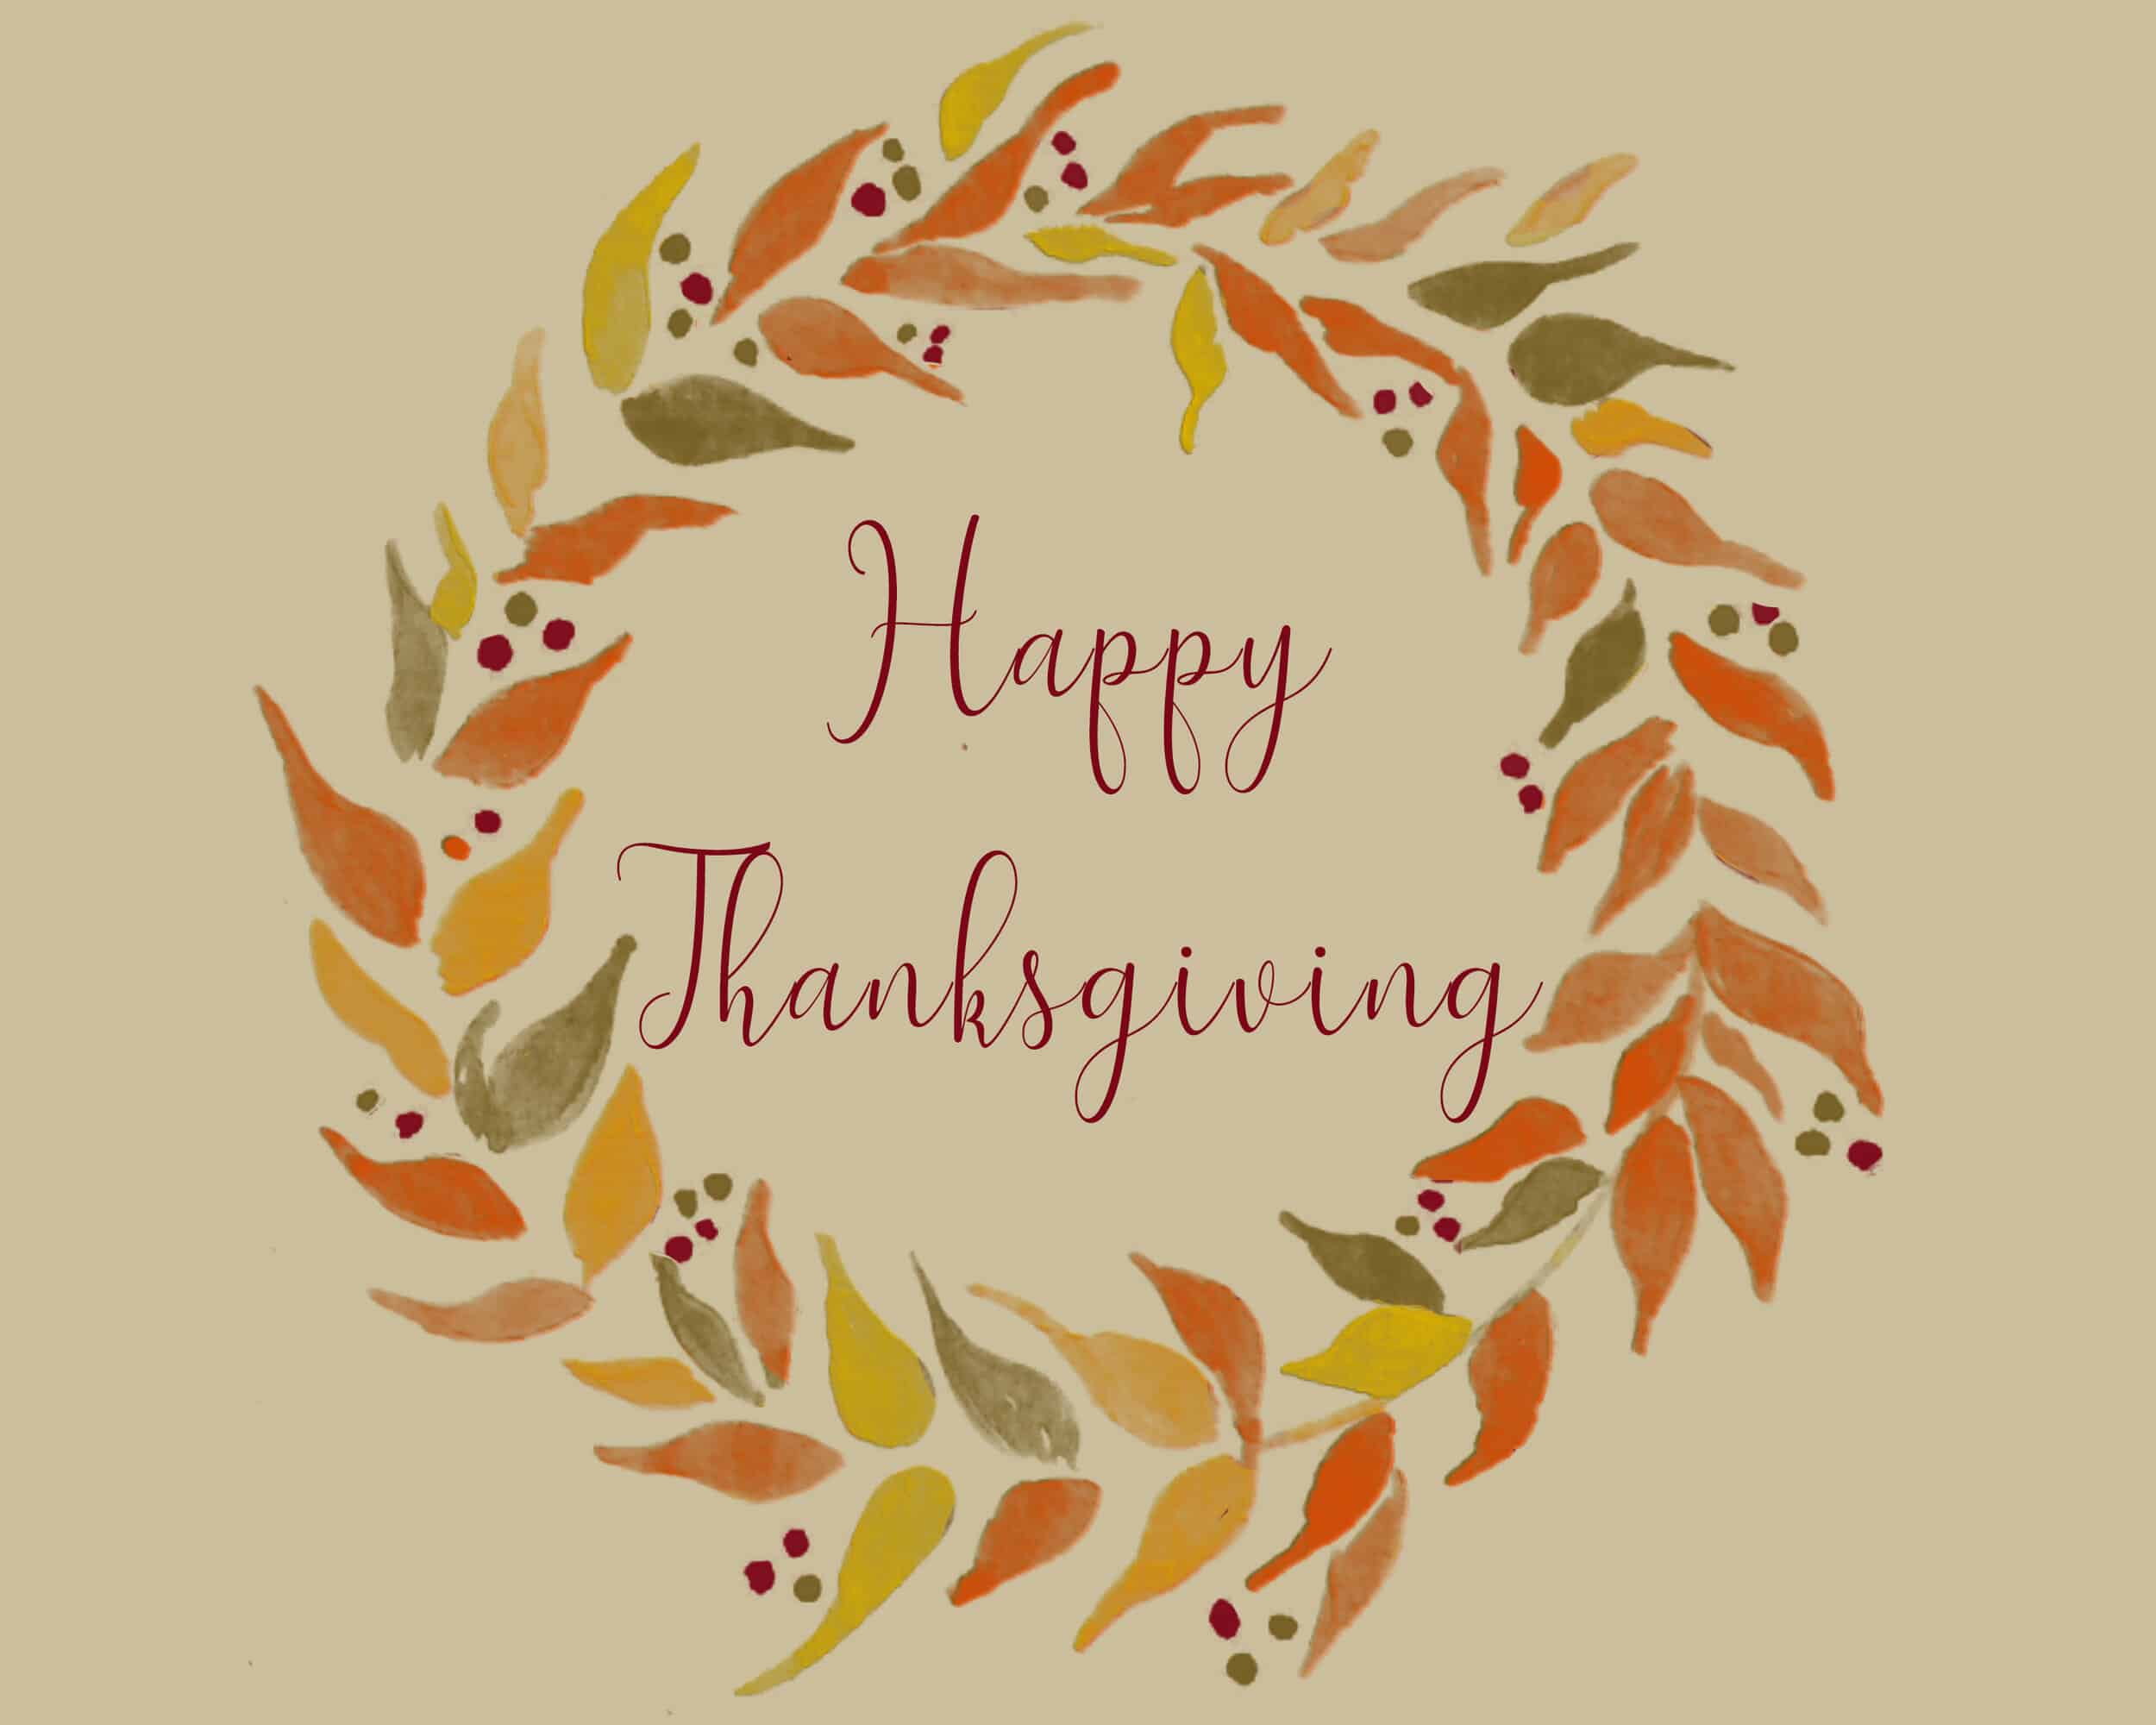 Happy Thanksgiving from The Vision Online.